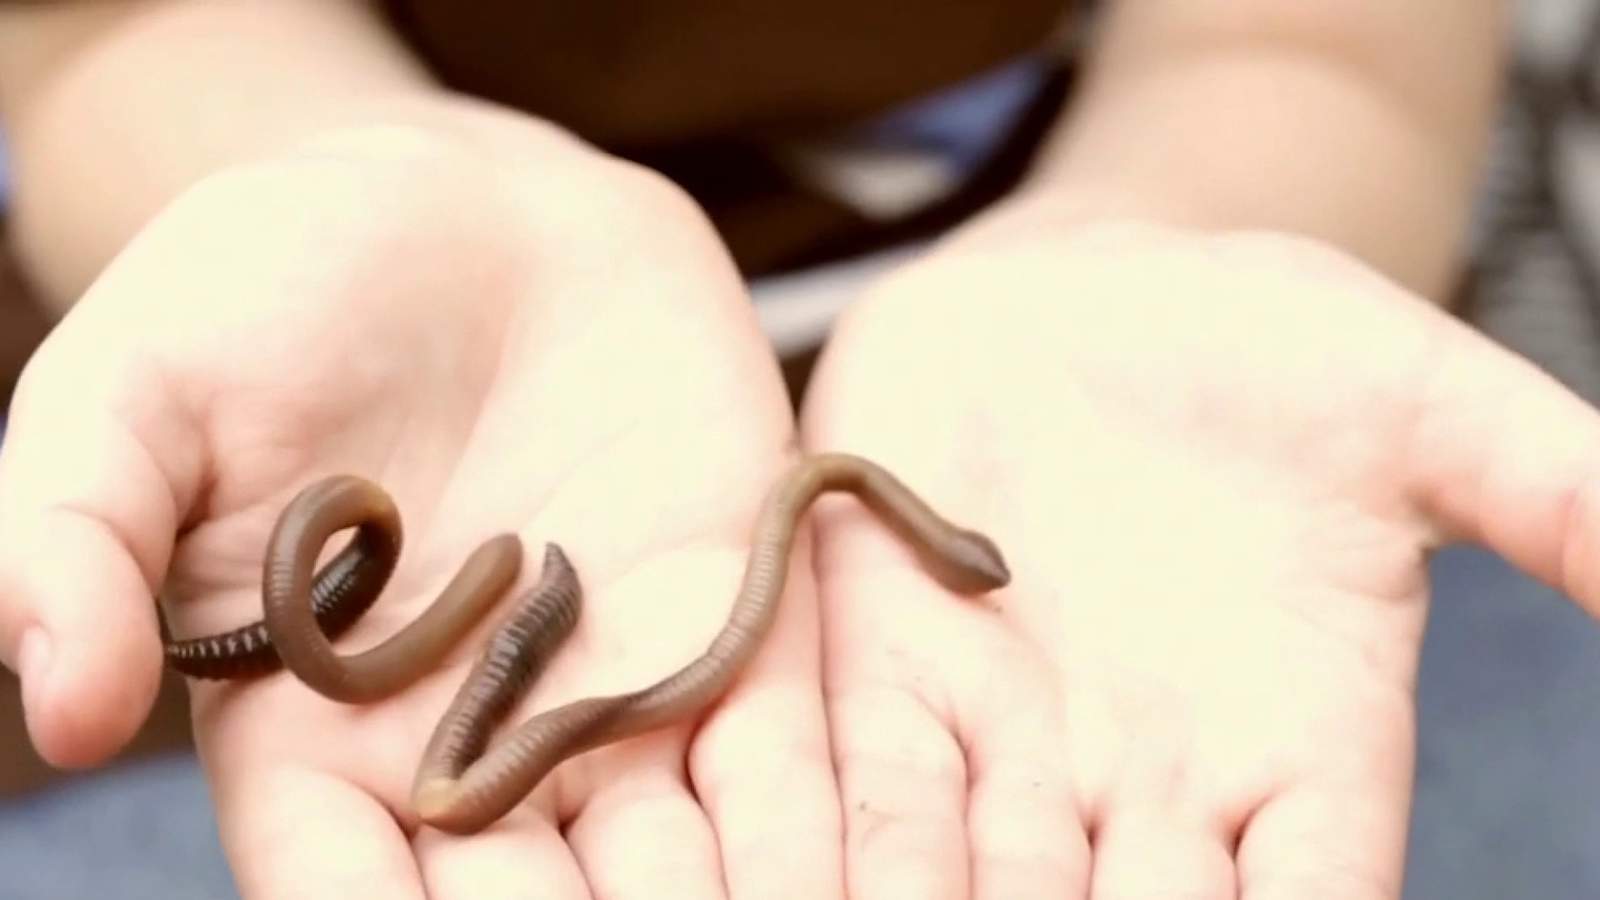 Worms are safe to eat, the European Union’s food safety agency says